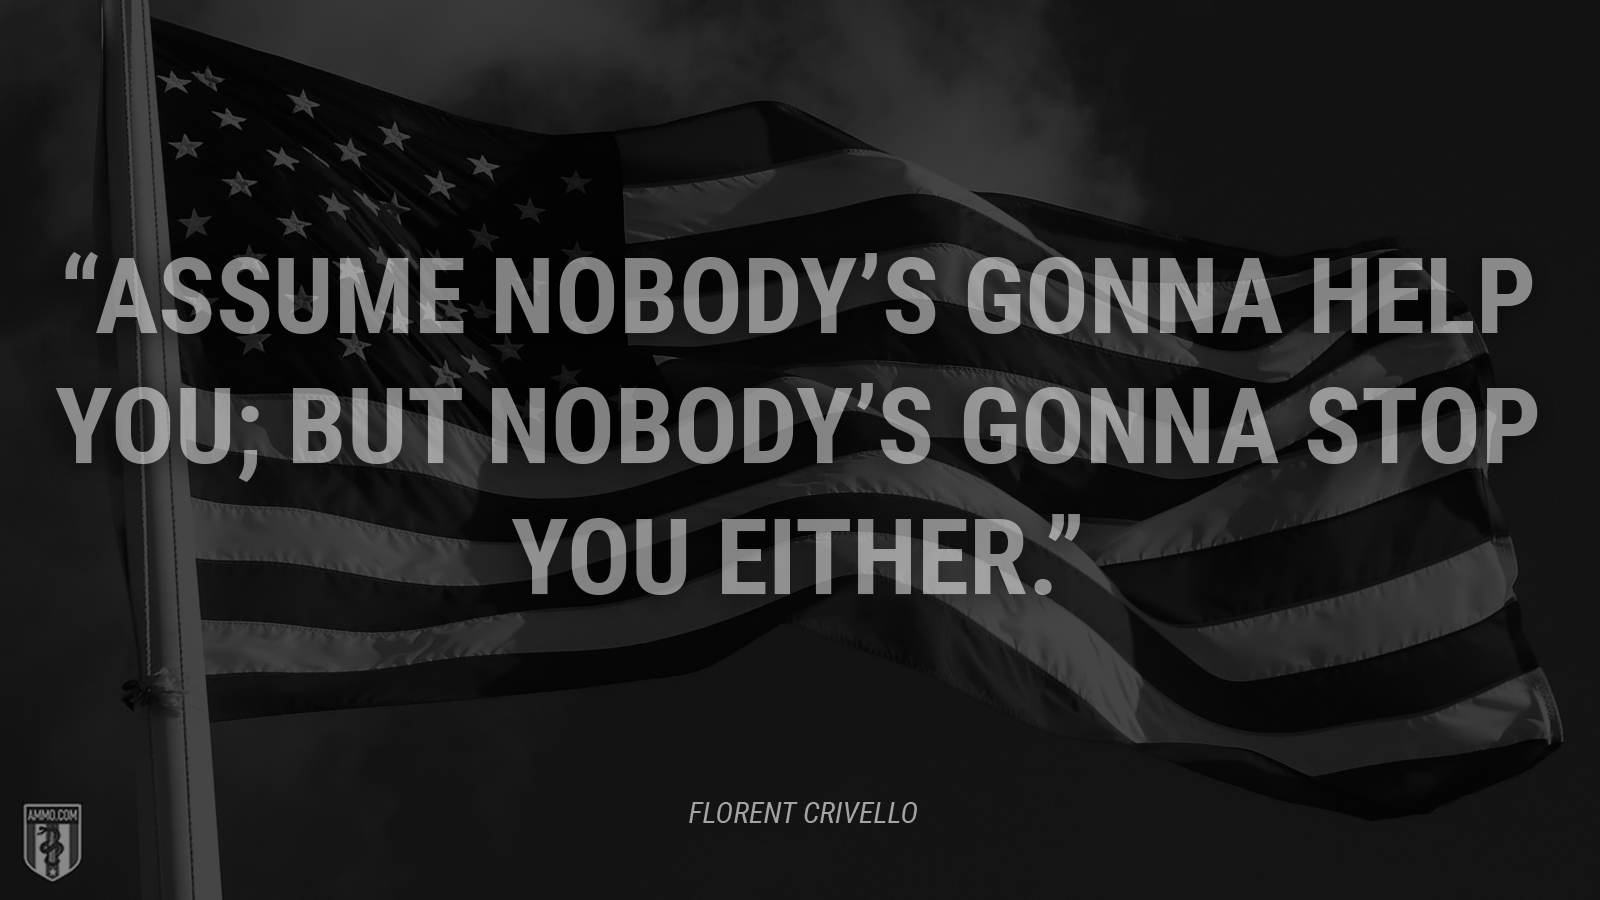 “Assume nobody’s gonna help you; but nobody’s gonna stop you either.” - Florent Crivello